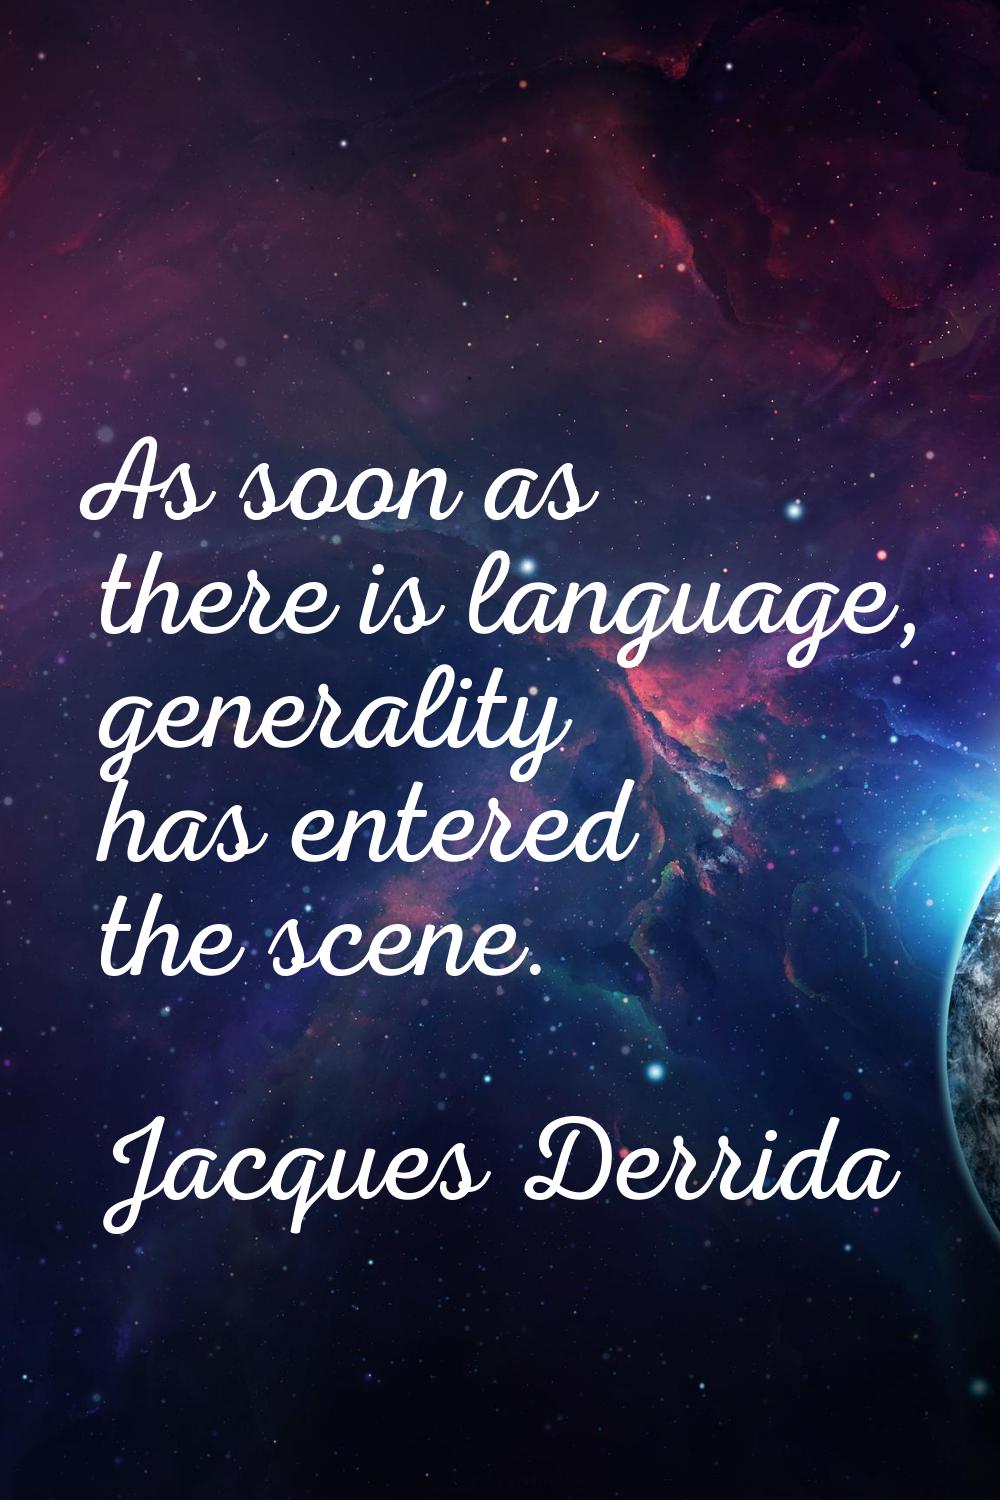 As soon as there is language, generality has entered the scene.